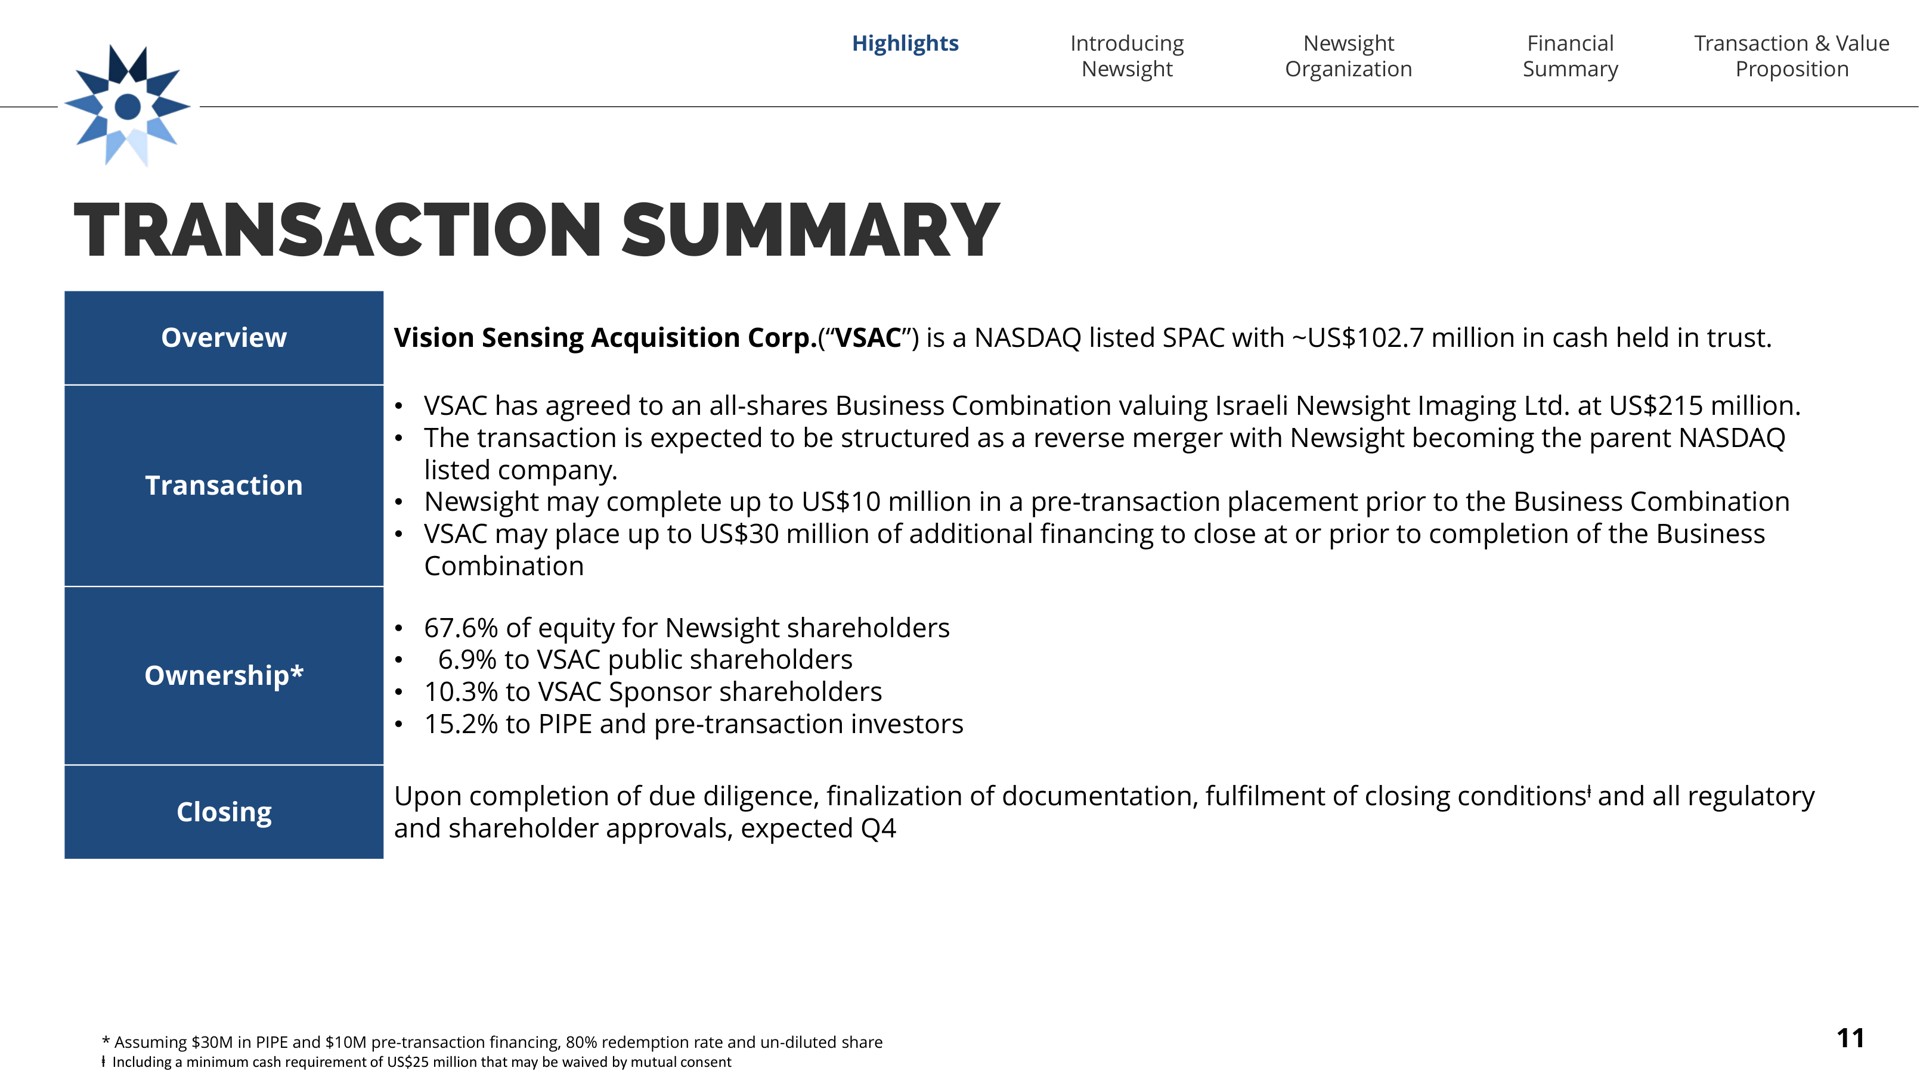 transaction summary overview vision sensing acquisition corp is a listed with us million in cash held in trust transaction ownership has agreed to an all shares business combination valuing imaging at us million the transaction is expected to be structured as a reverse merger with becoming the parent listed company may complete up to us million in a transaction placement prior to the business combination may place up to us million of additional financing to close at or prior to completion of the business combination of equity for shareholders to public shareholders to sponsor shareholders to pipe and transaction investors closing upon completion of due diligence of documentation of closing conditions and all regulatory and shareholder approvals expected | Newsight Imaging